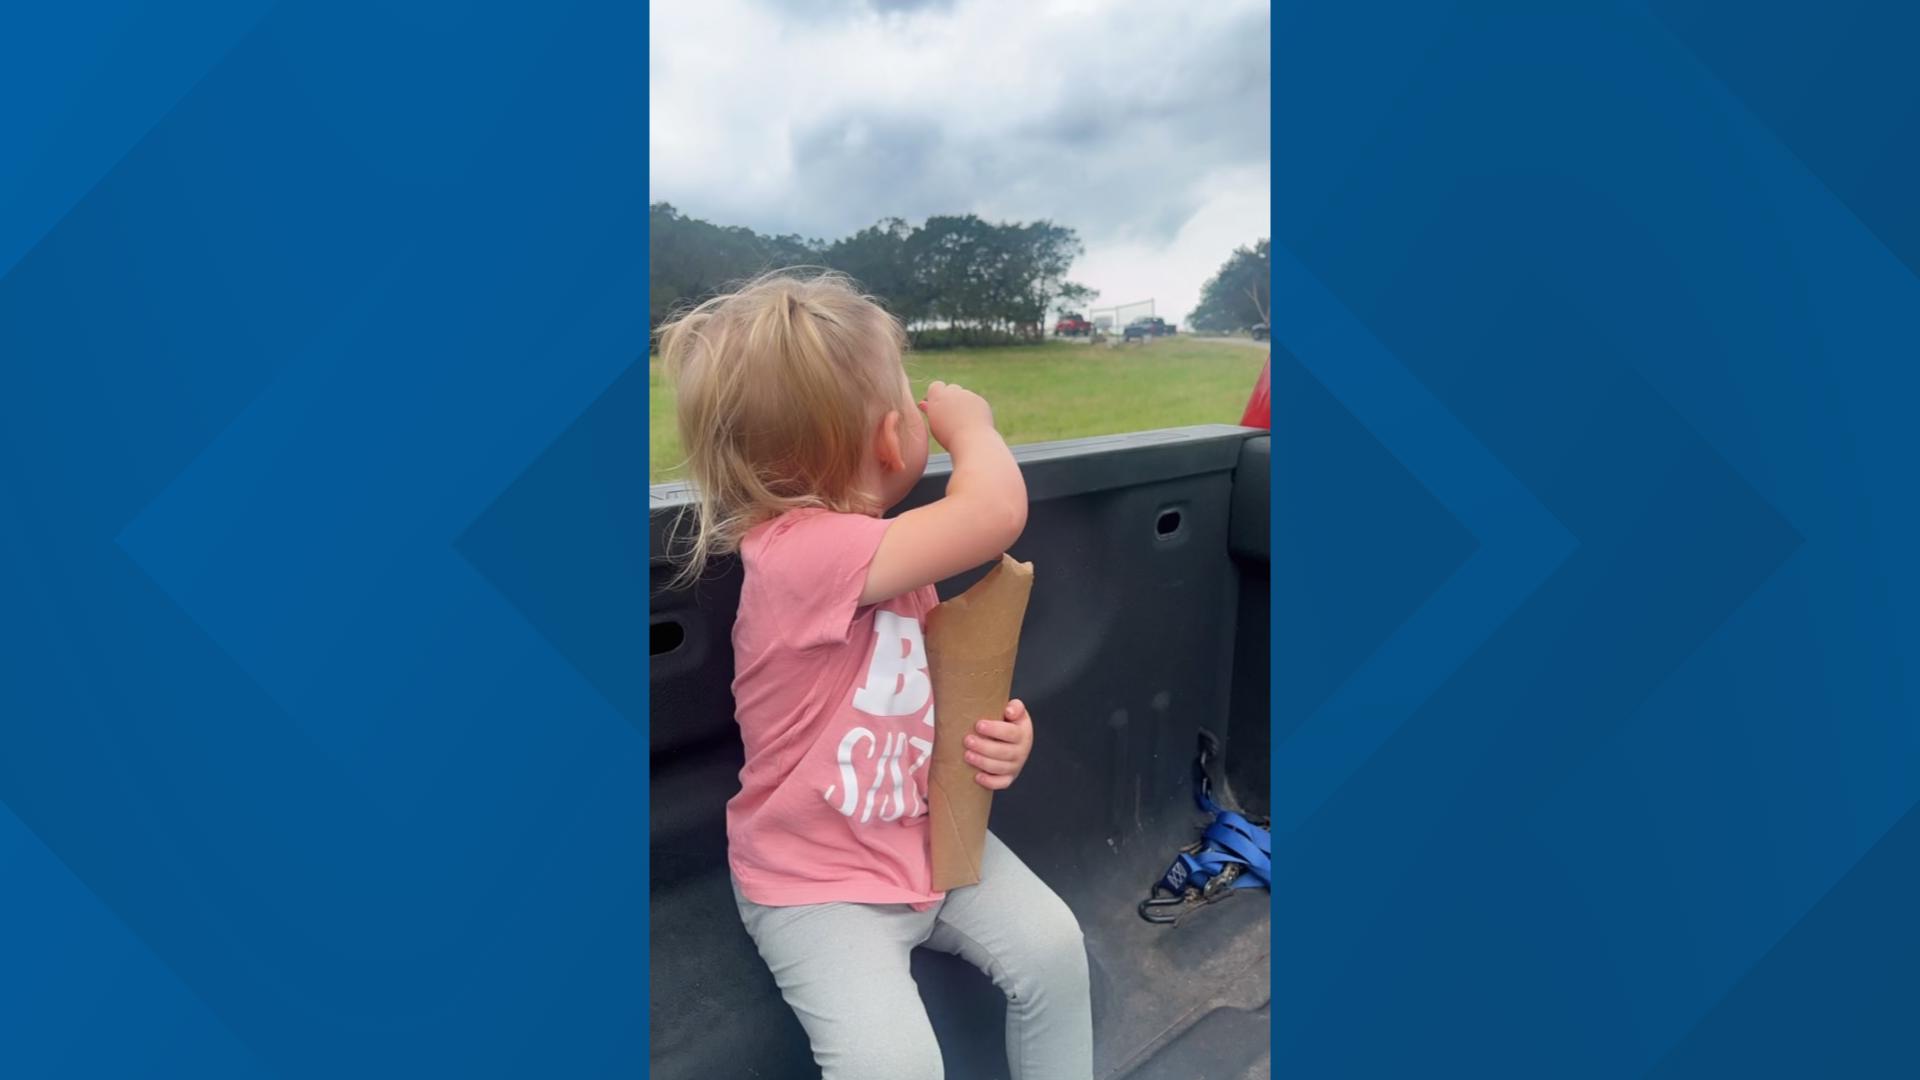 When 2-year-old Paisley Toten reached out to feed a giraffe, he opened wide and hoisted her up.